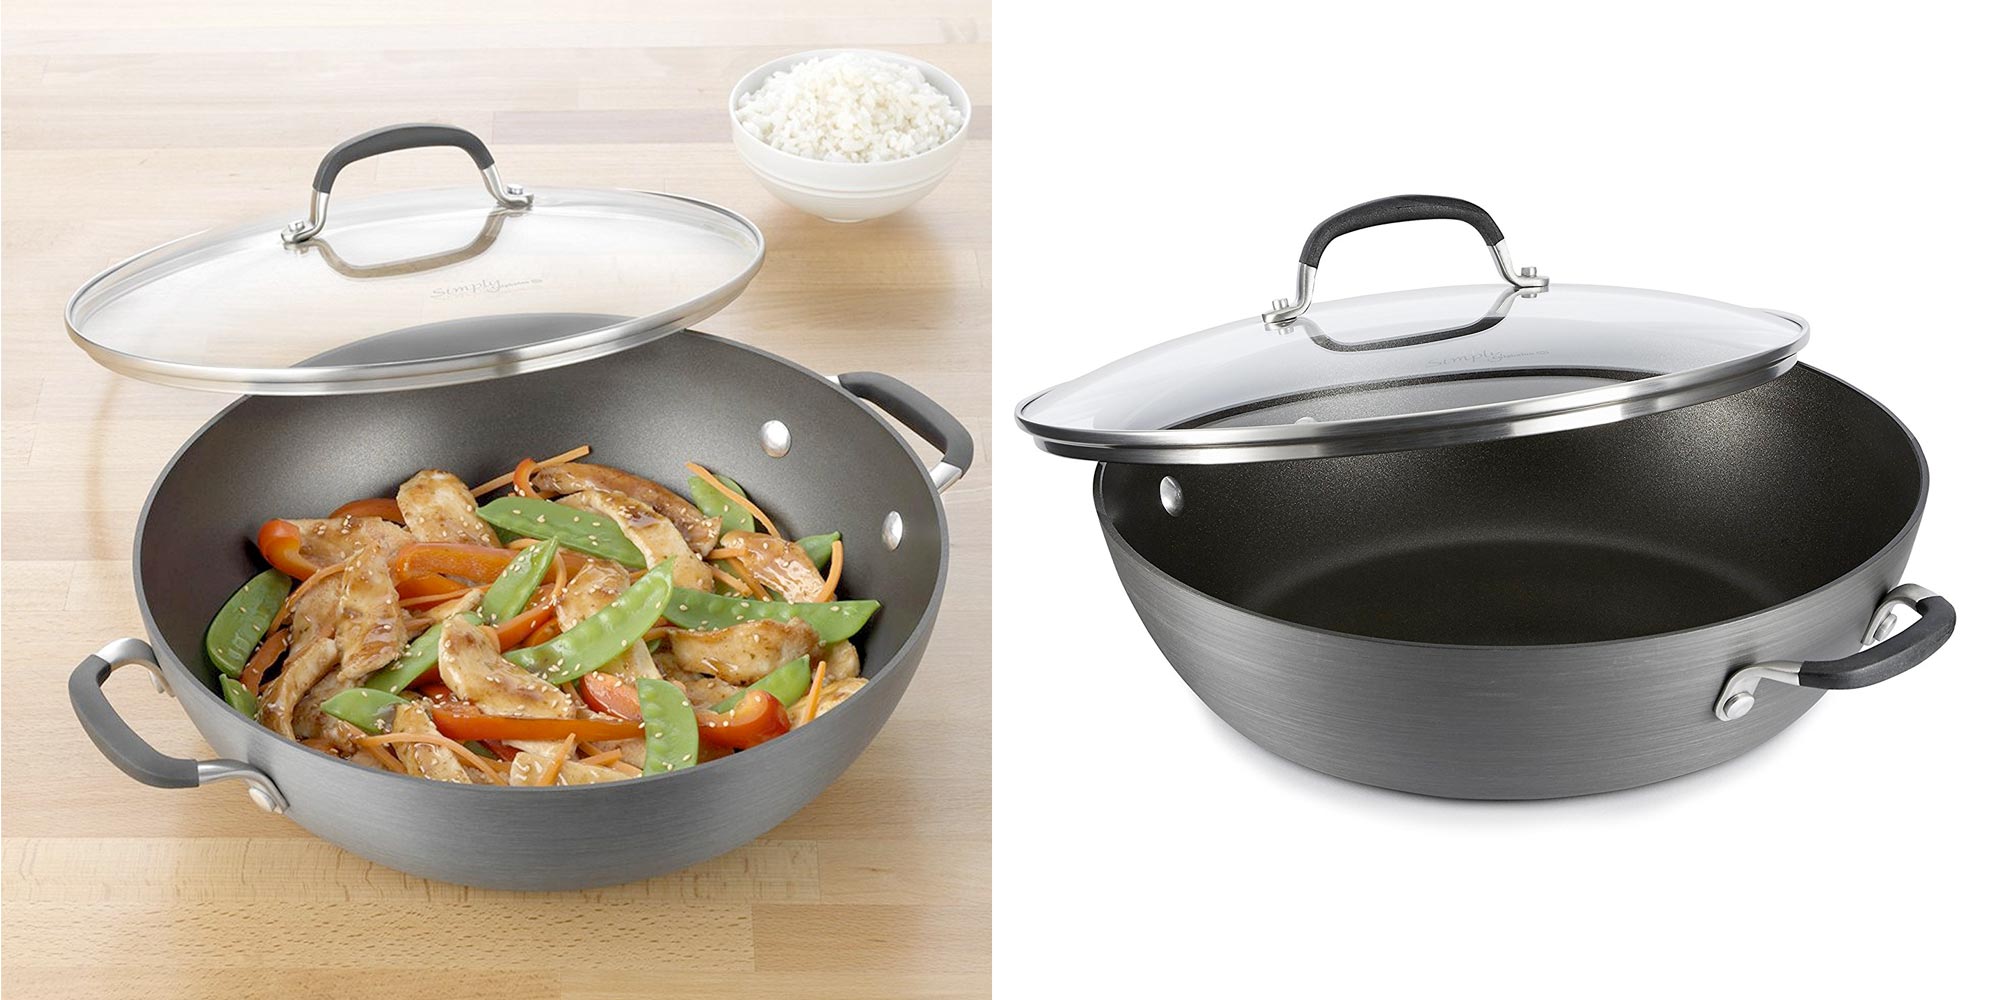 Make kitchen cleanup a breeze w/ this Calphalon Nonstick 12-inch Pan for $24